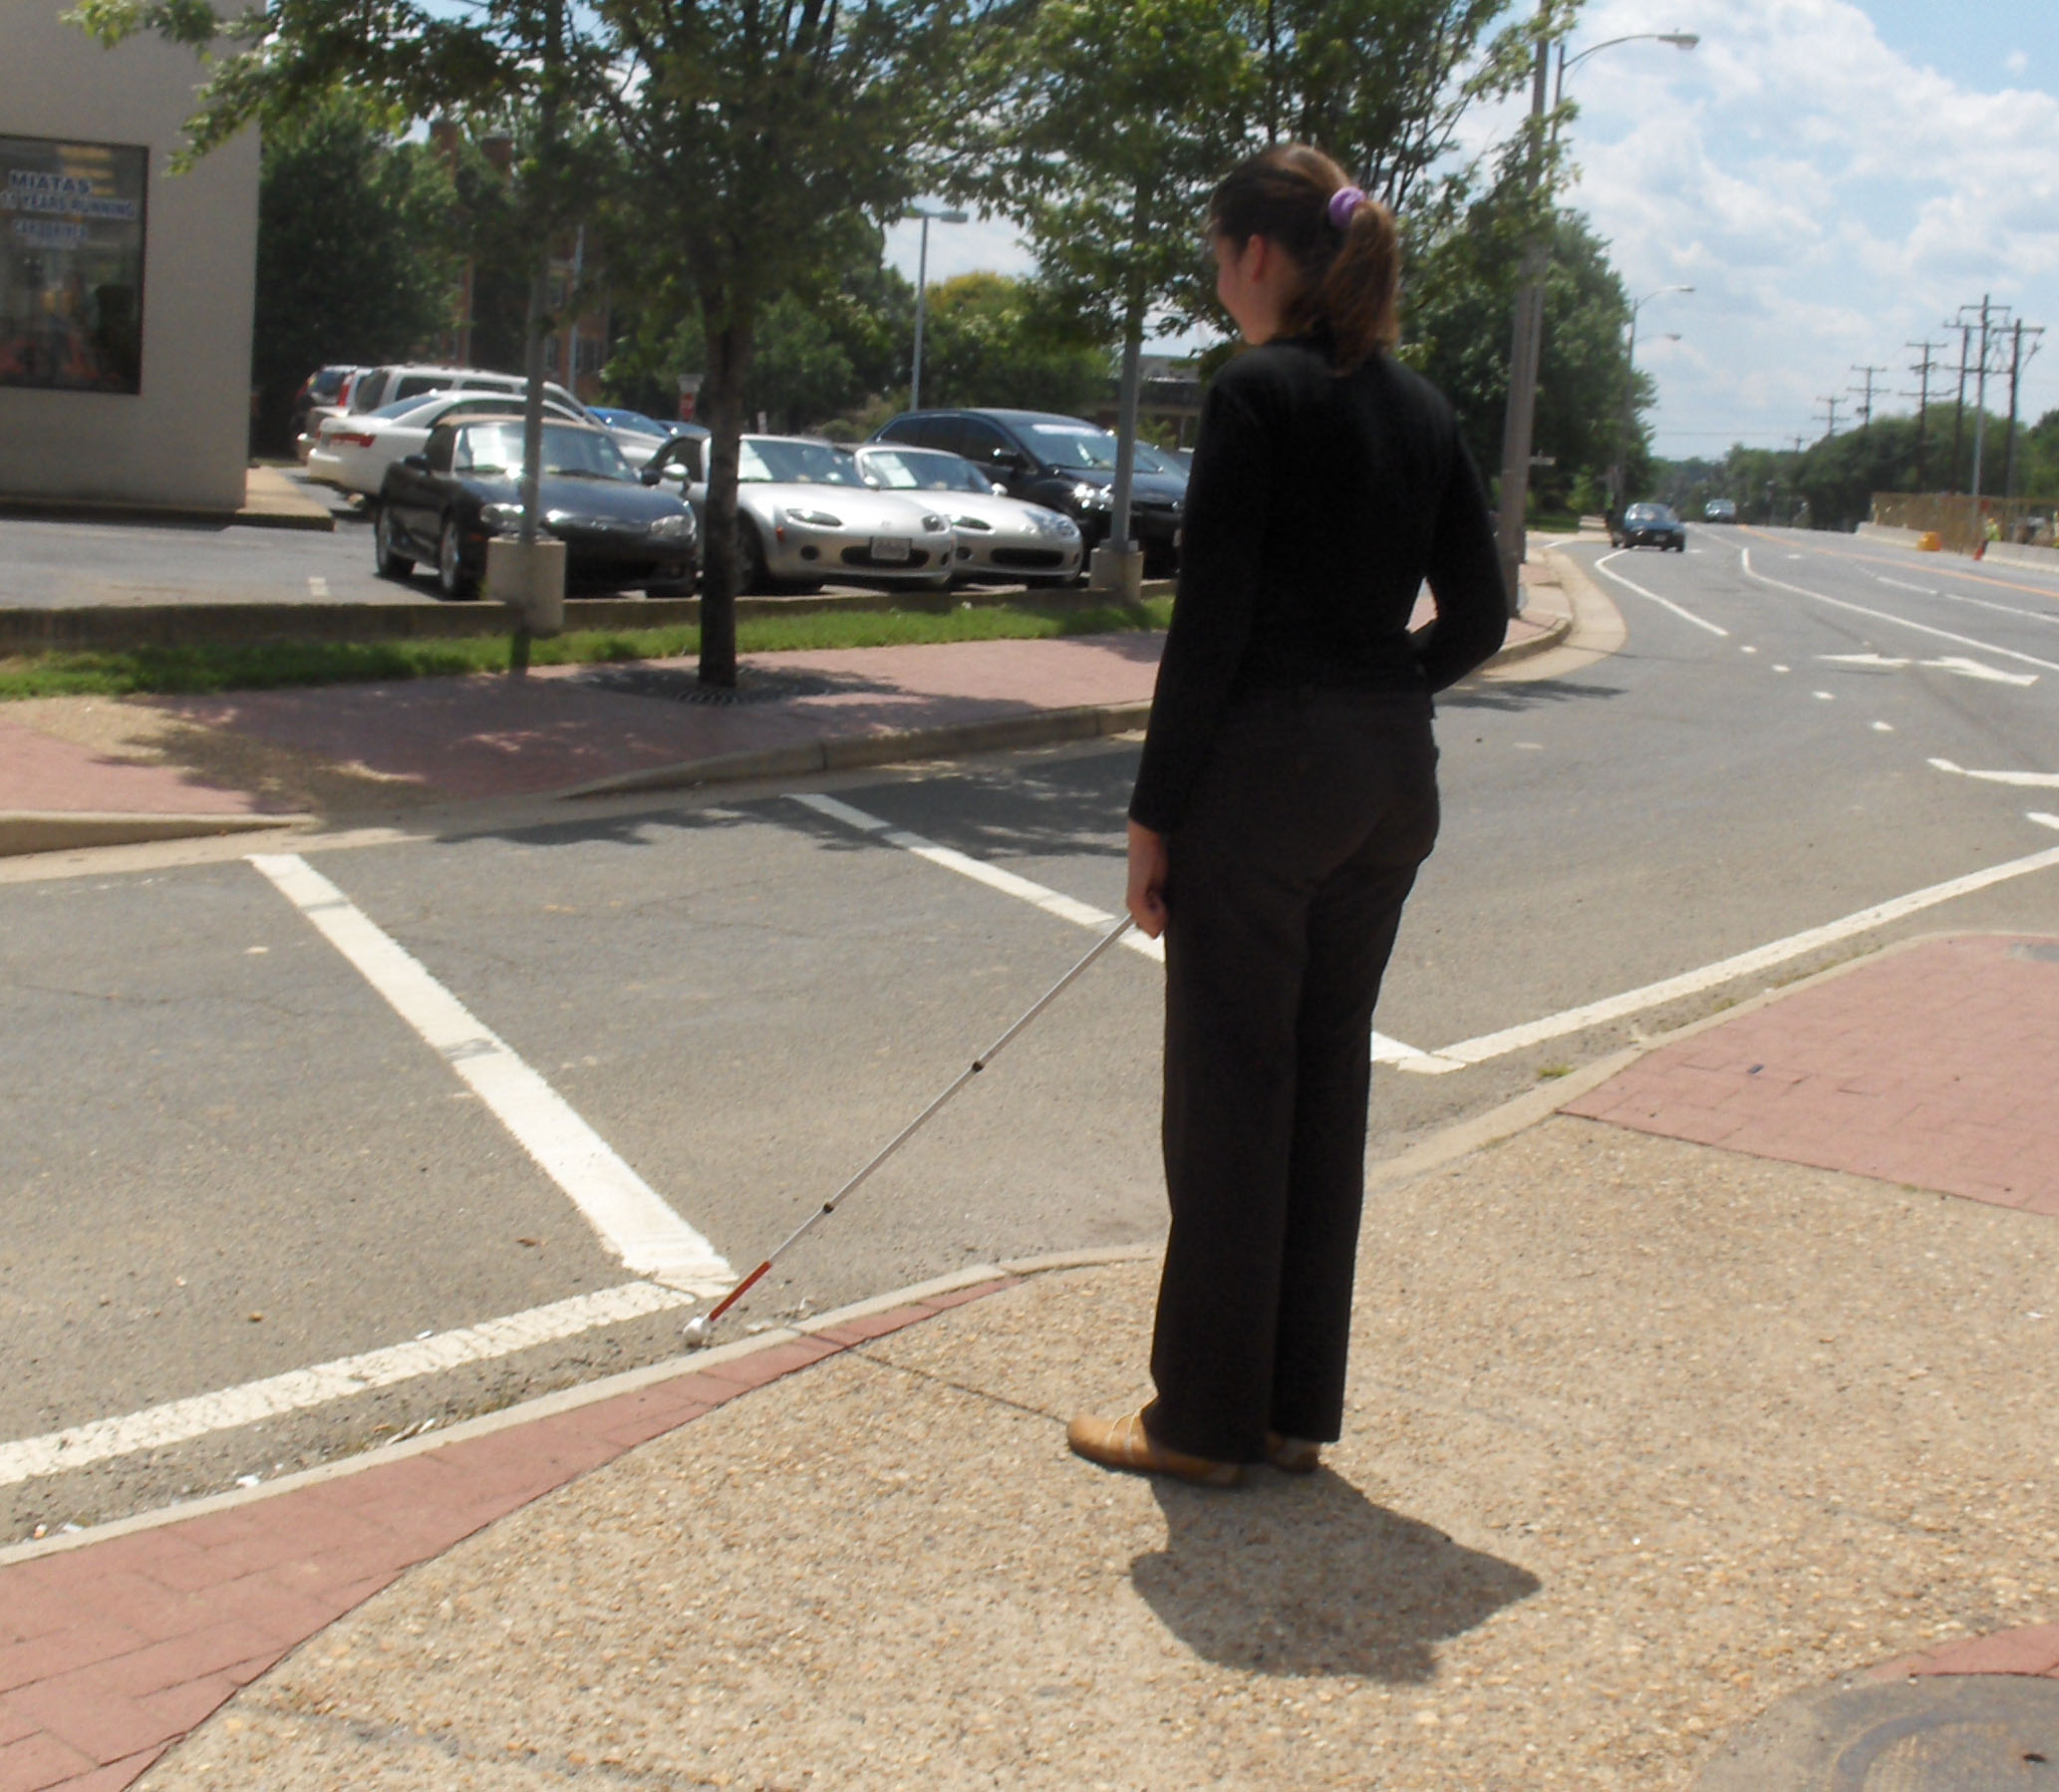 Two photos show Mimi standing on the SW island with her cane near the crosswalk of the right-turning lane. To her right is a street with one or two cars.  The second photo shows a minivan leaving the street and turning slightly to its right to enter the lane in front of Mimi and approach the crosswalk.